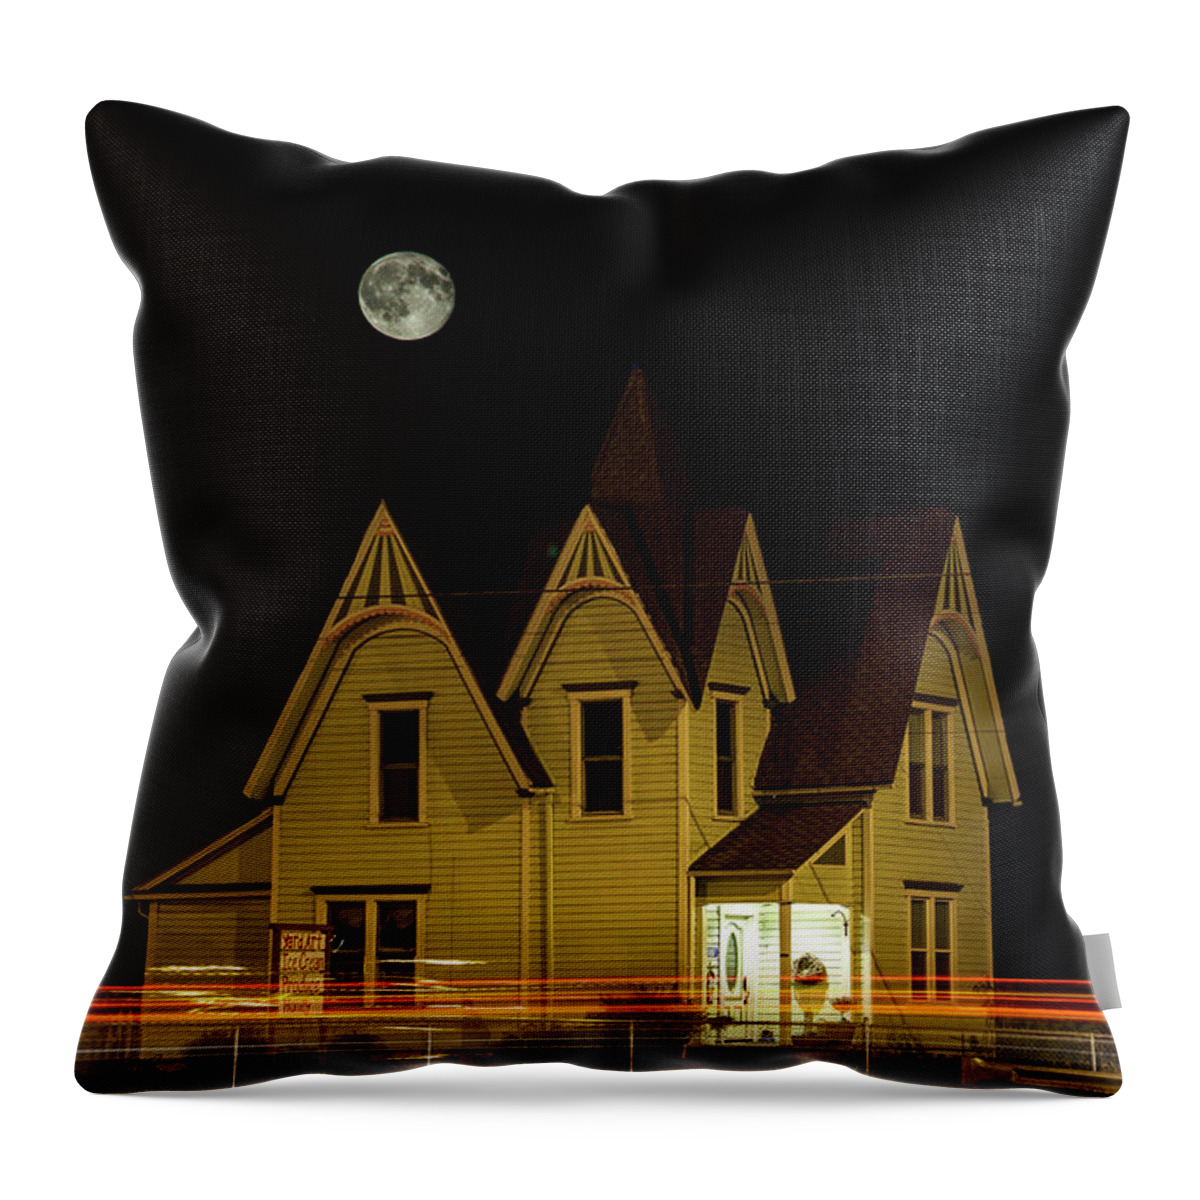 Moon Throw Pillow featuring the photograph Night View by Tony Locke